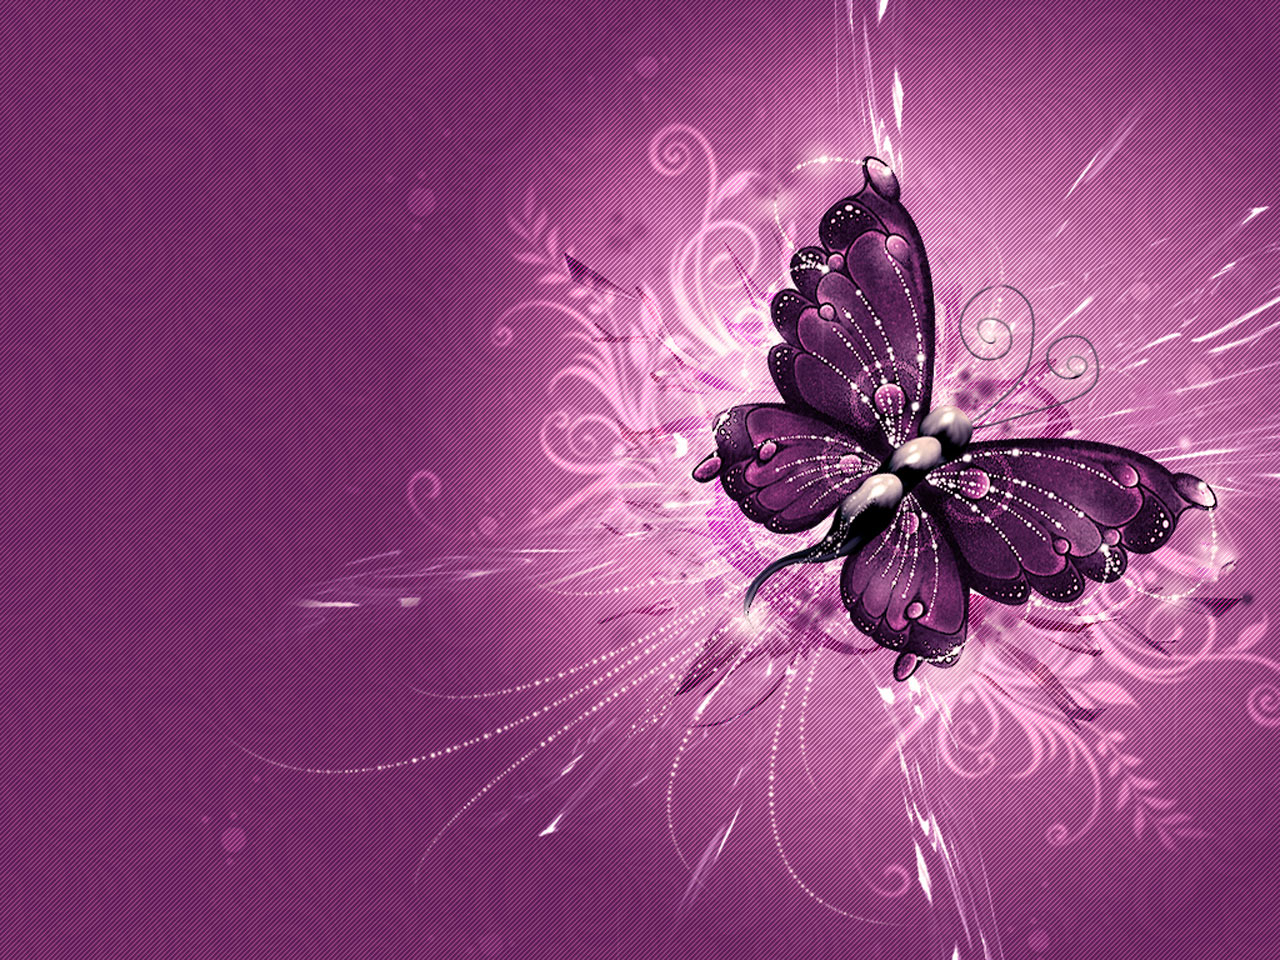 Pretty Purple Wallpaper For Desktop Image Amp Pictures Becuo